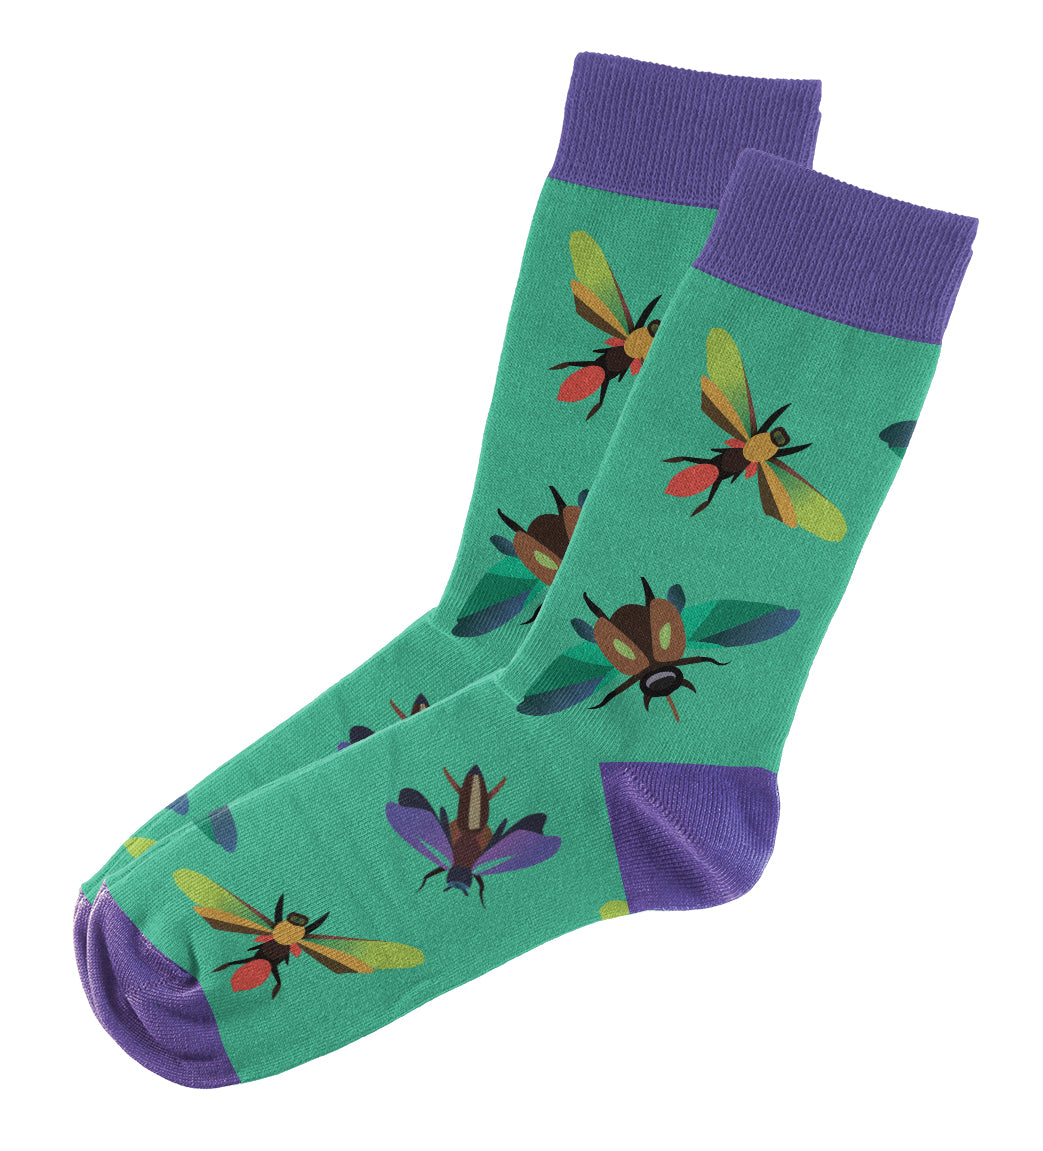 Mens Foozys Socks Design - Fly Fishing and Flies Design in White, Black